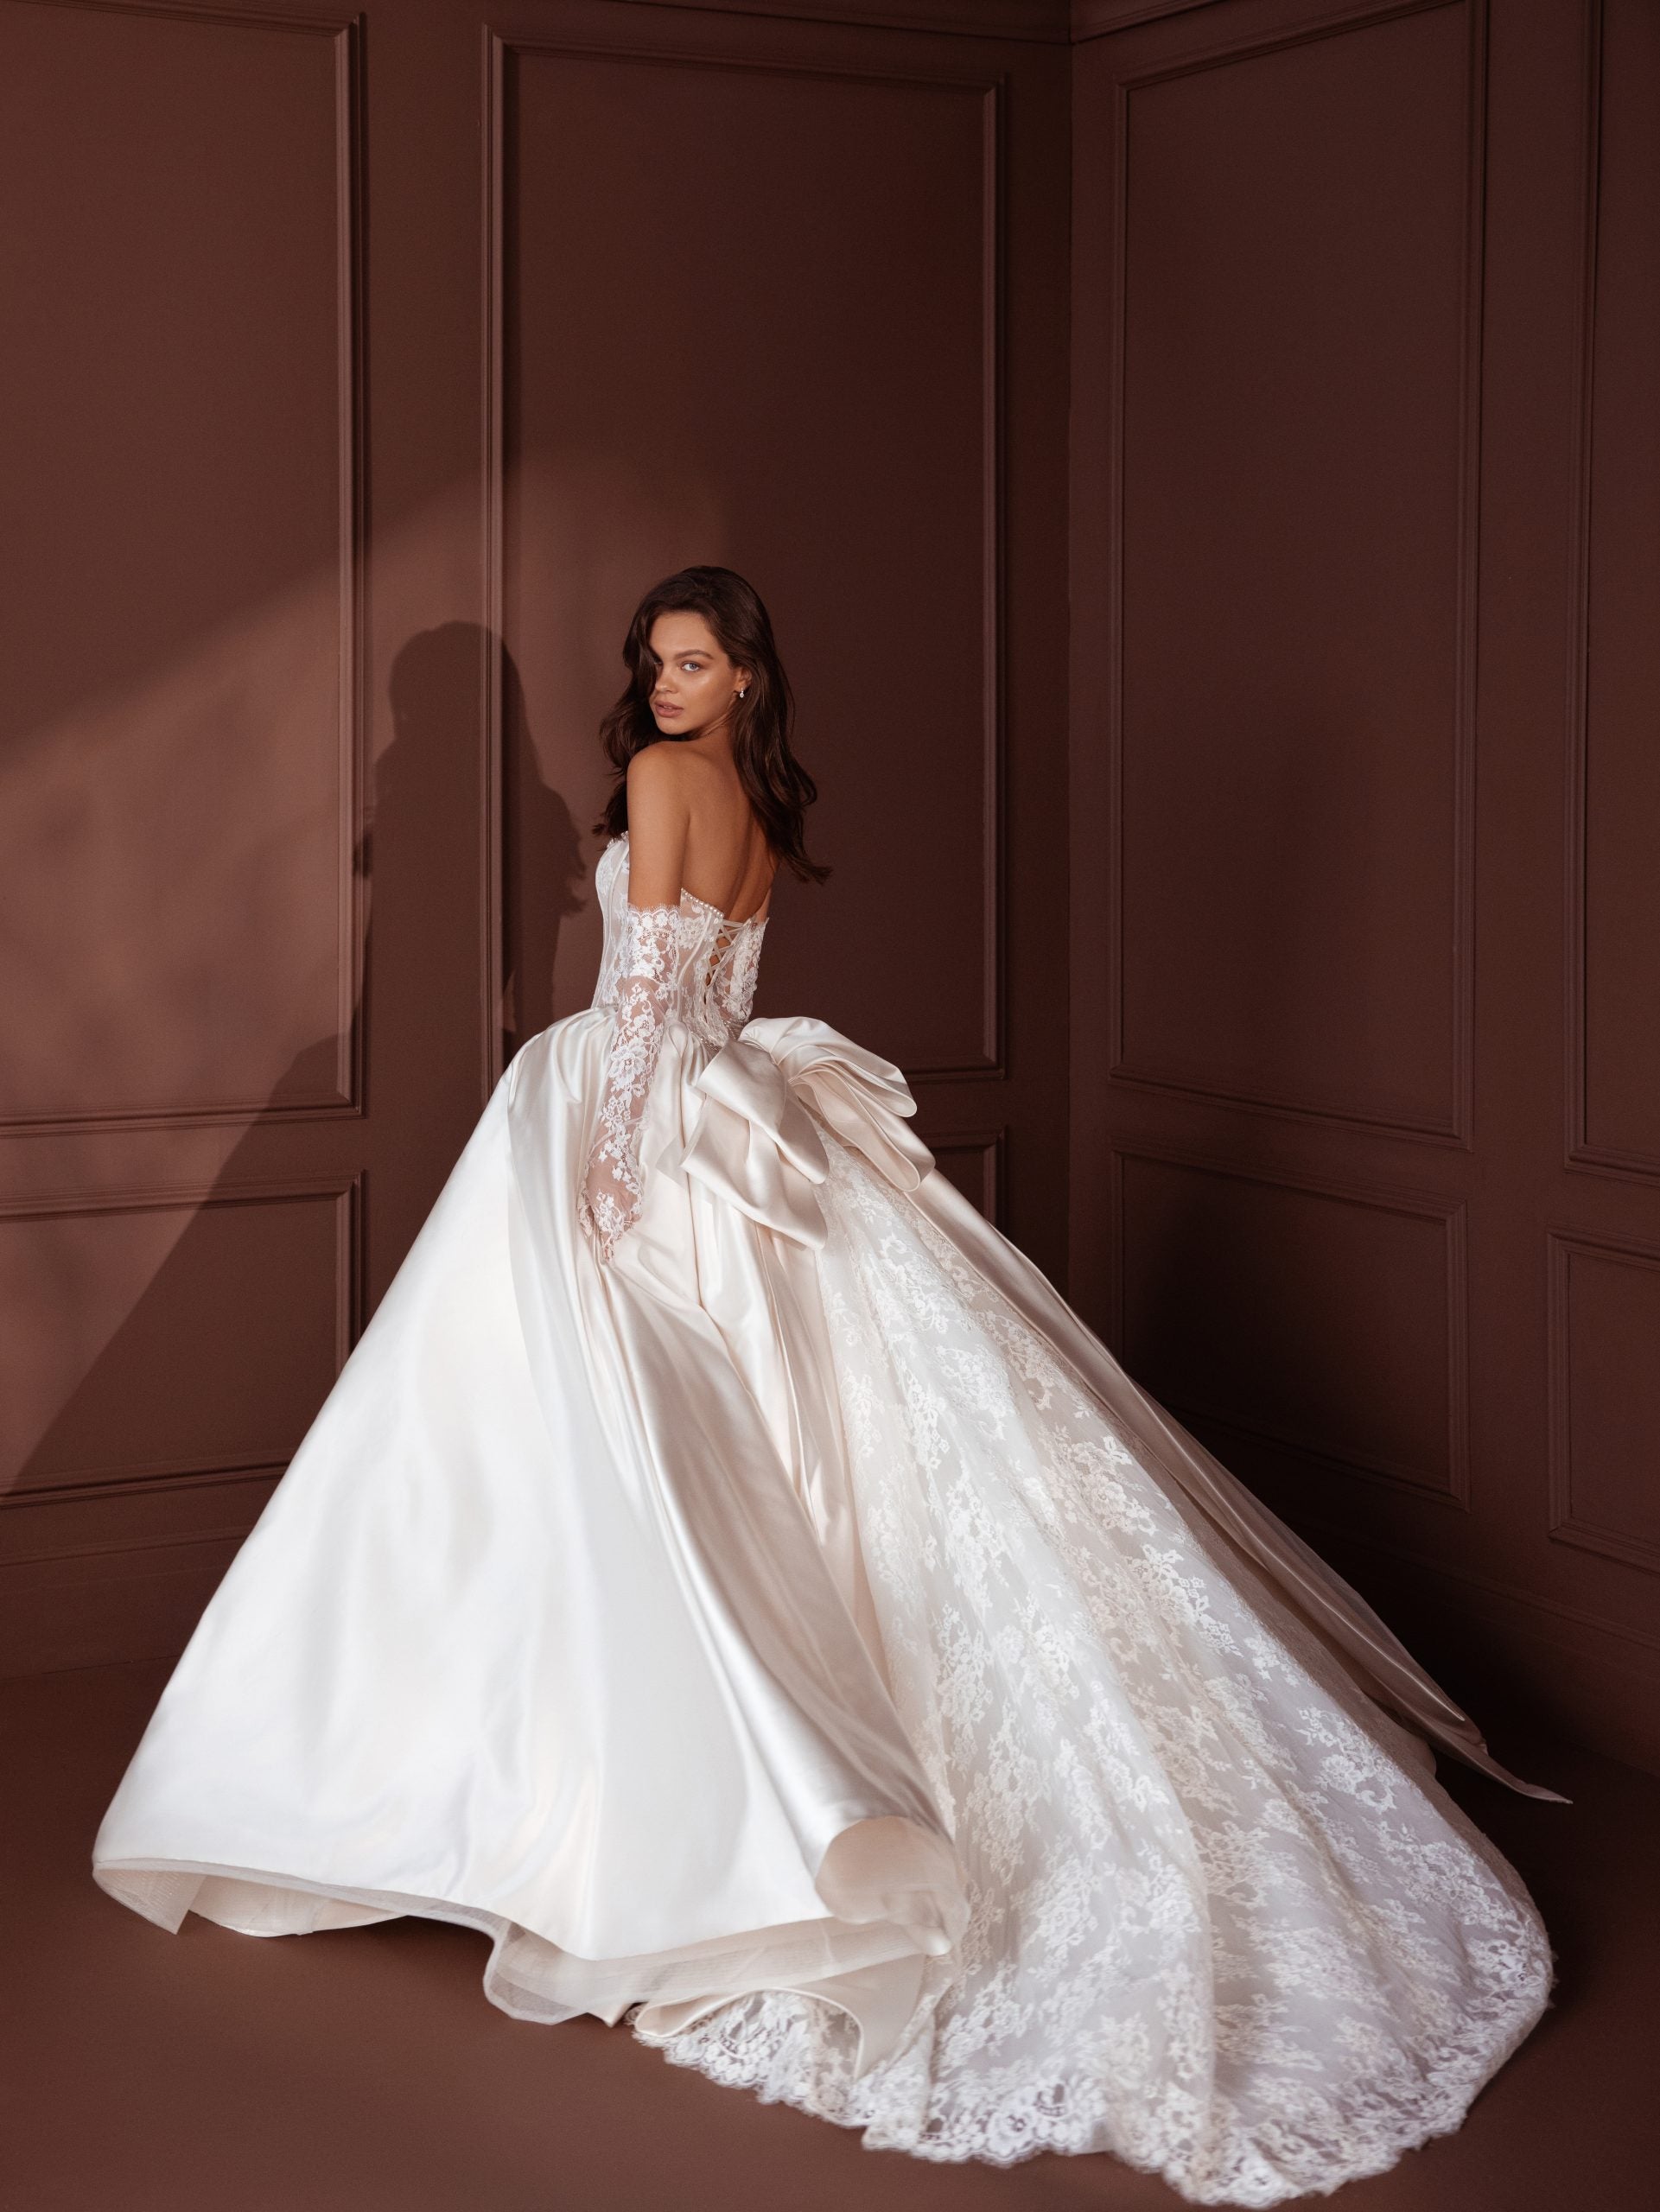 Strapless ballgown with sheer Alençon lace bodice by Pnina Tornai - Image 3